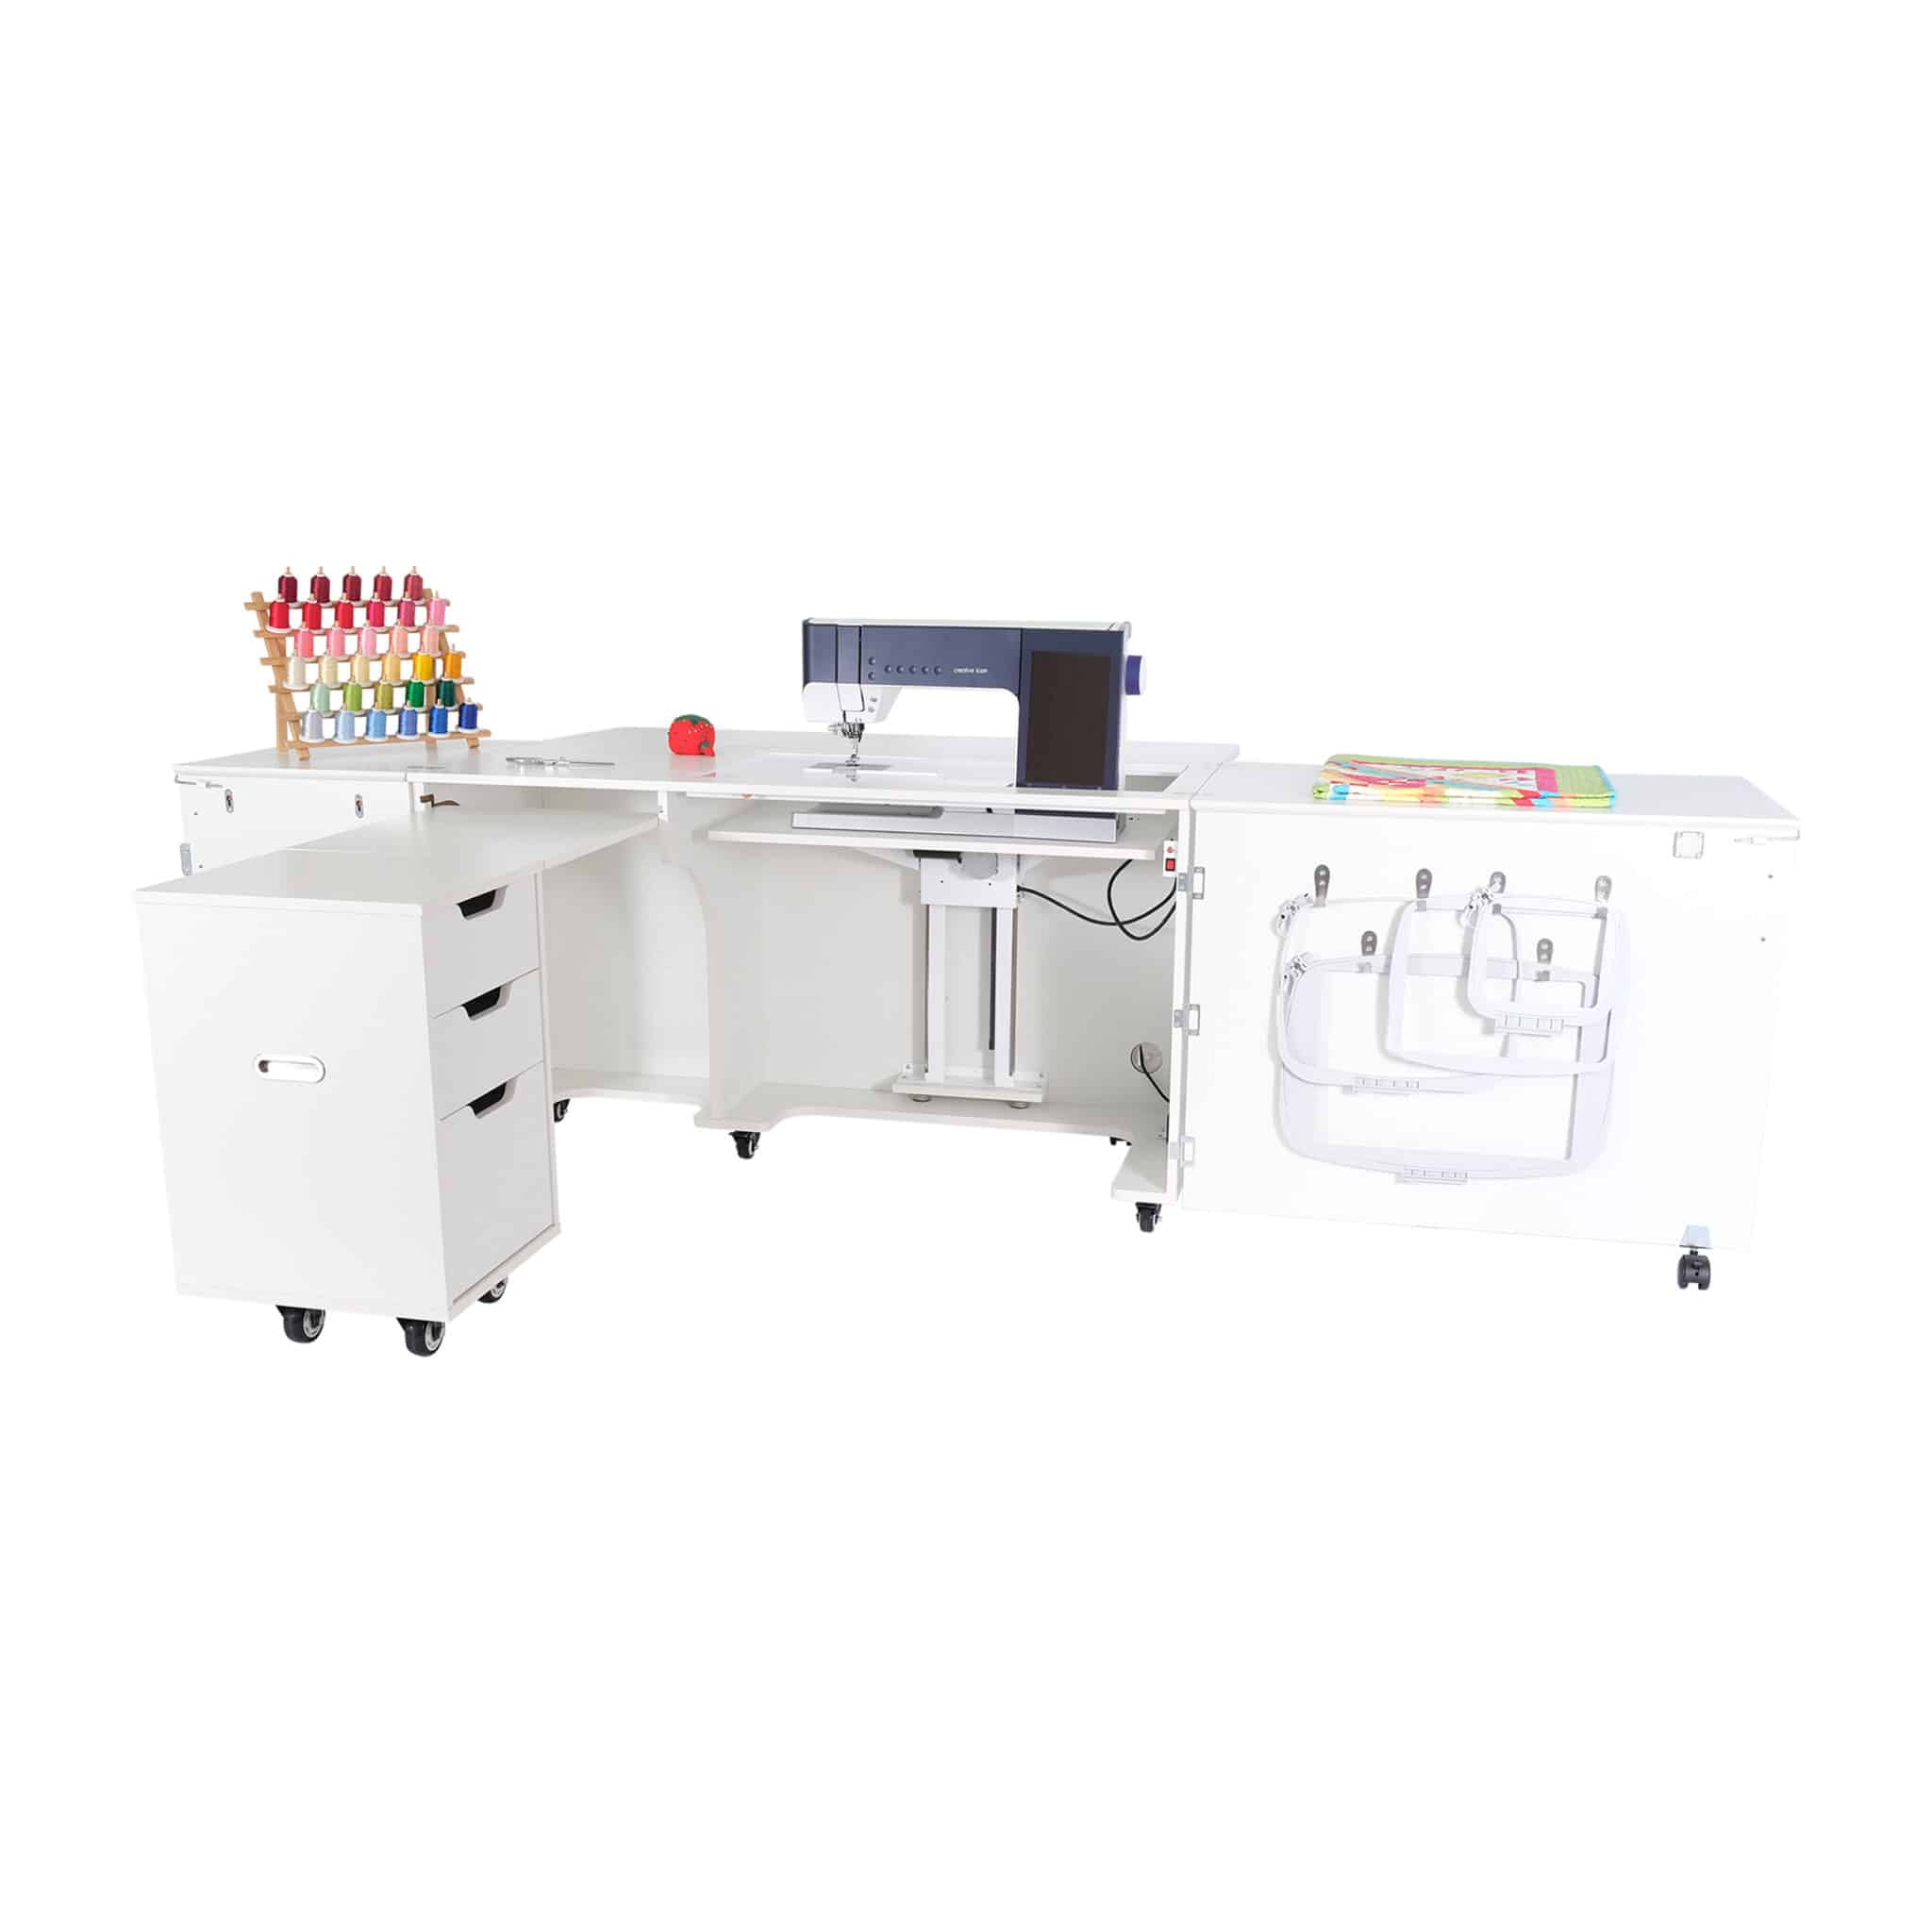 Outback Electric Sewing Cabinet Arrow